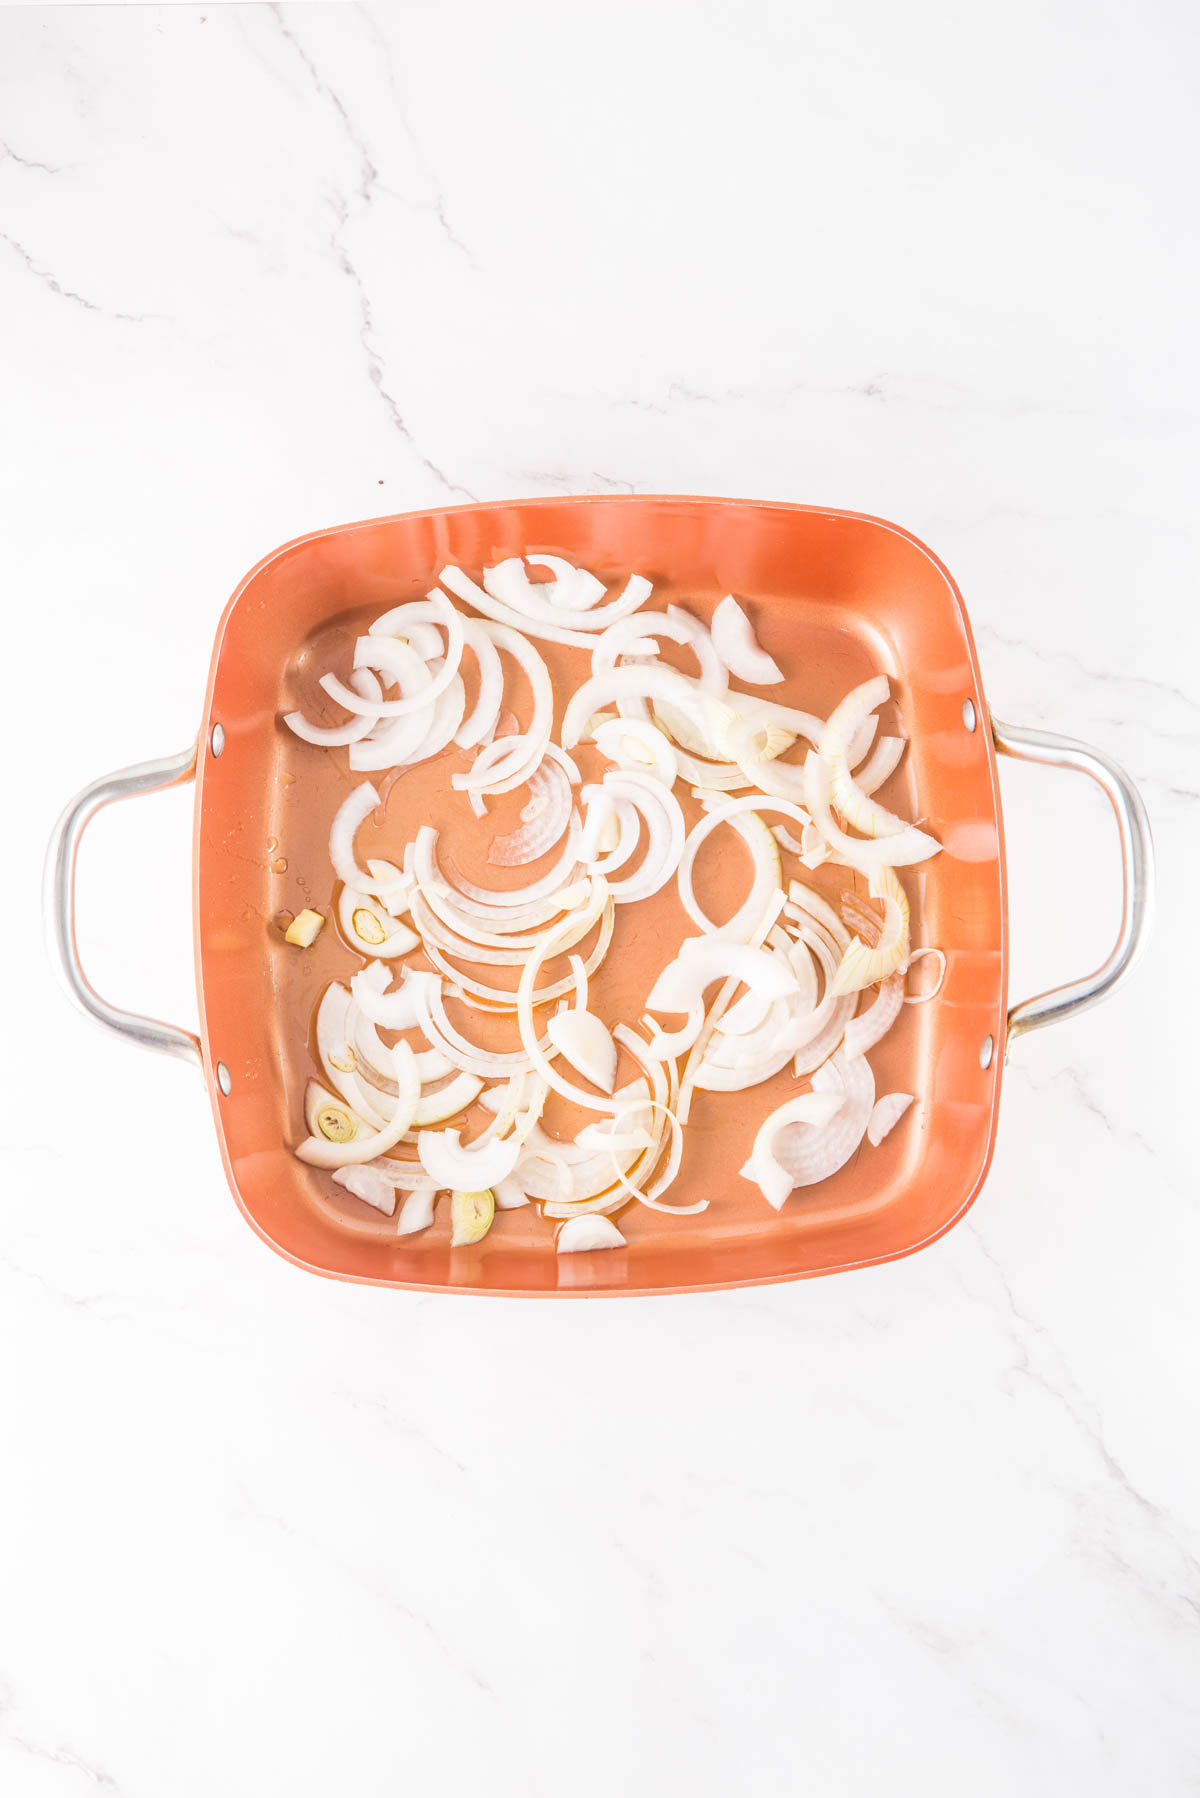 An orange baking dish filled with onions.